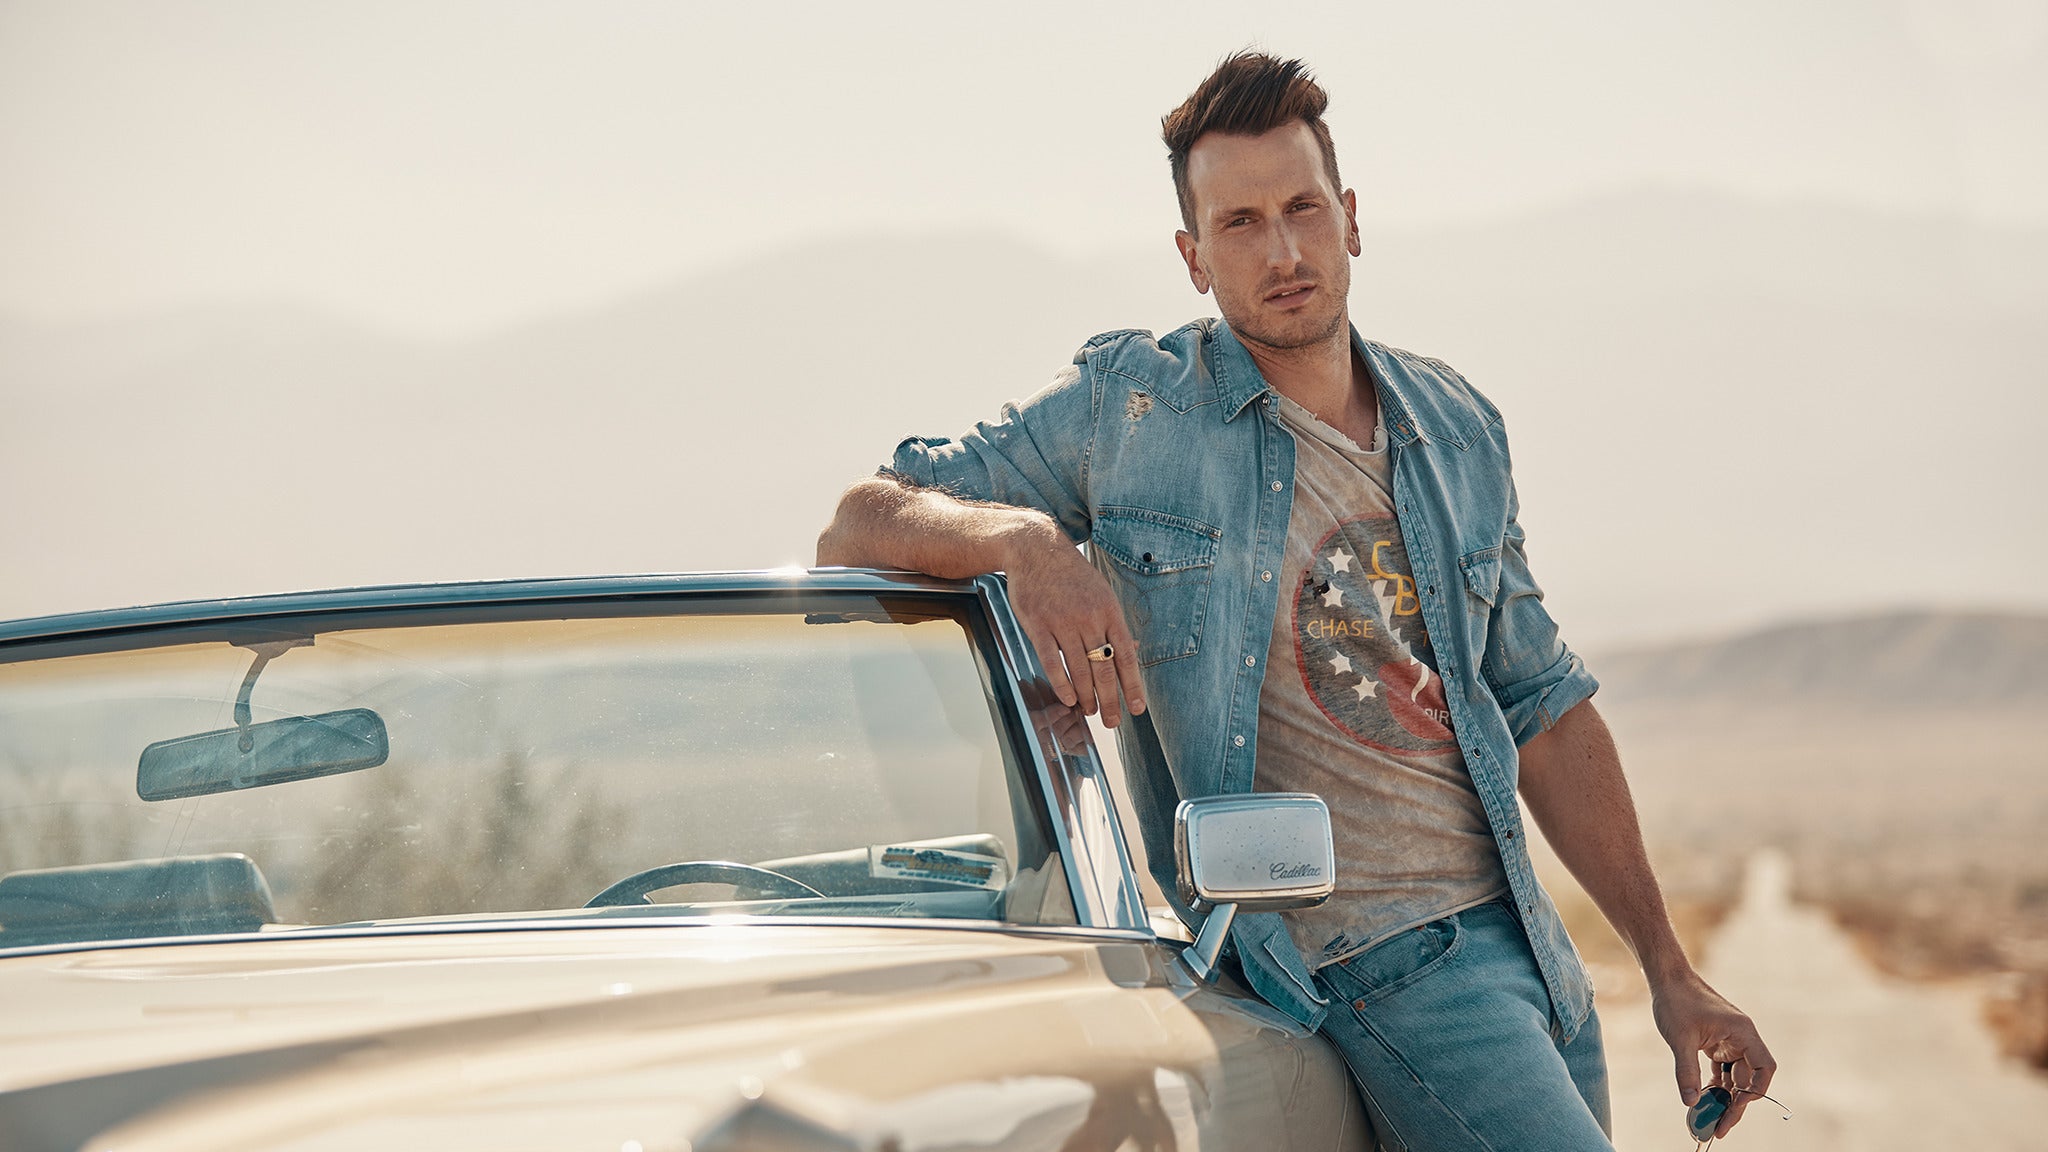 Russell Dickerson with special guest Drew Green presale password for performance tickets in Salt Lake City, UT (The Union)